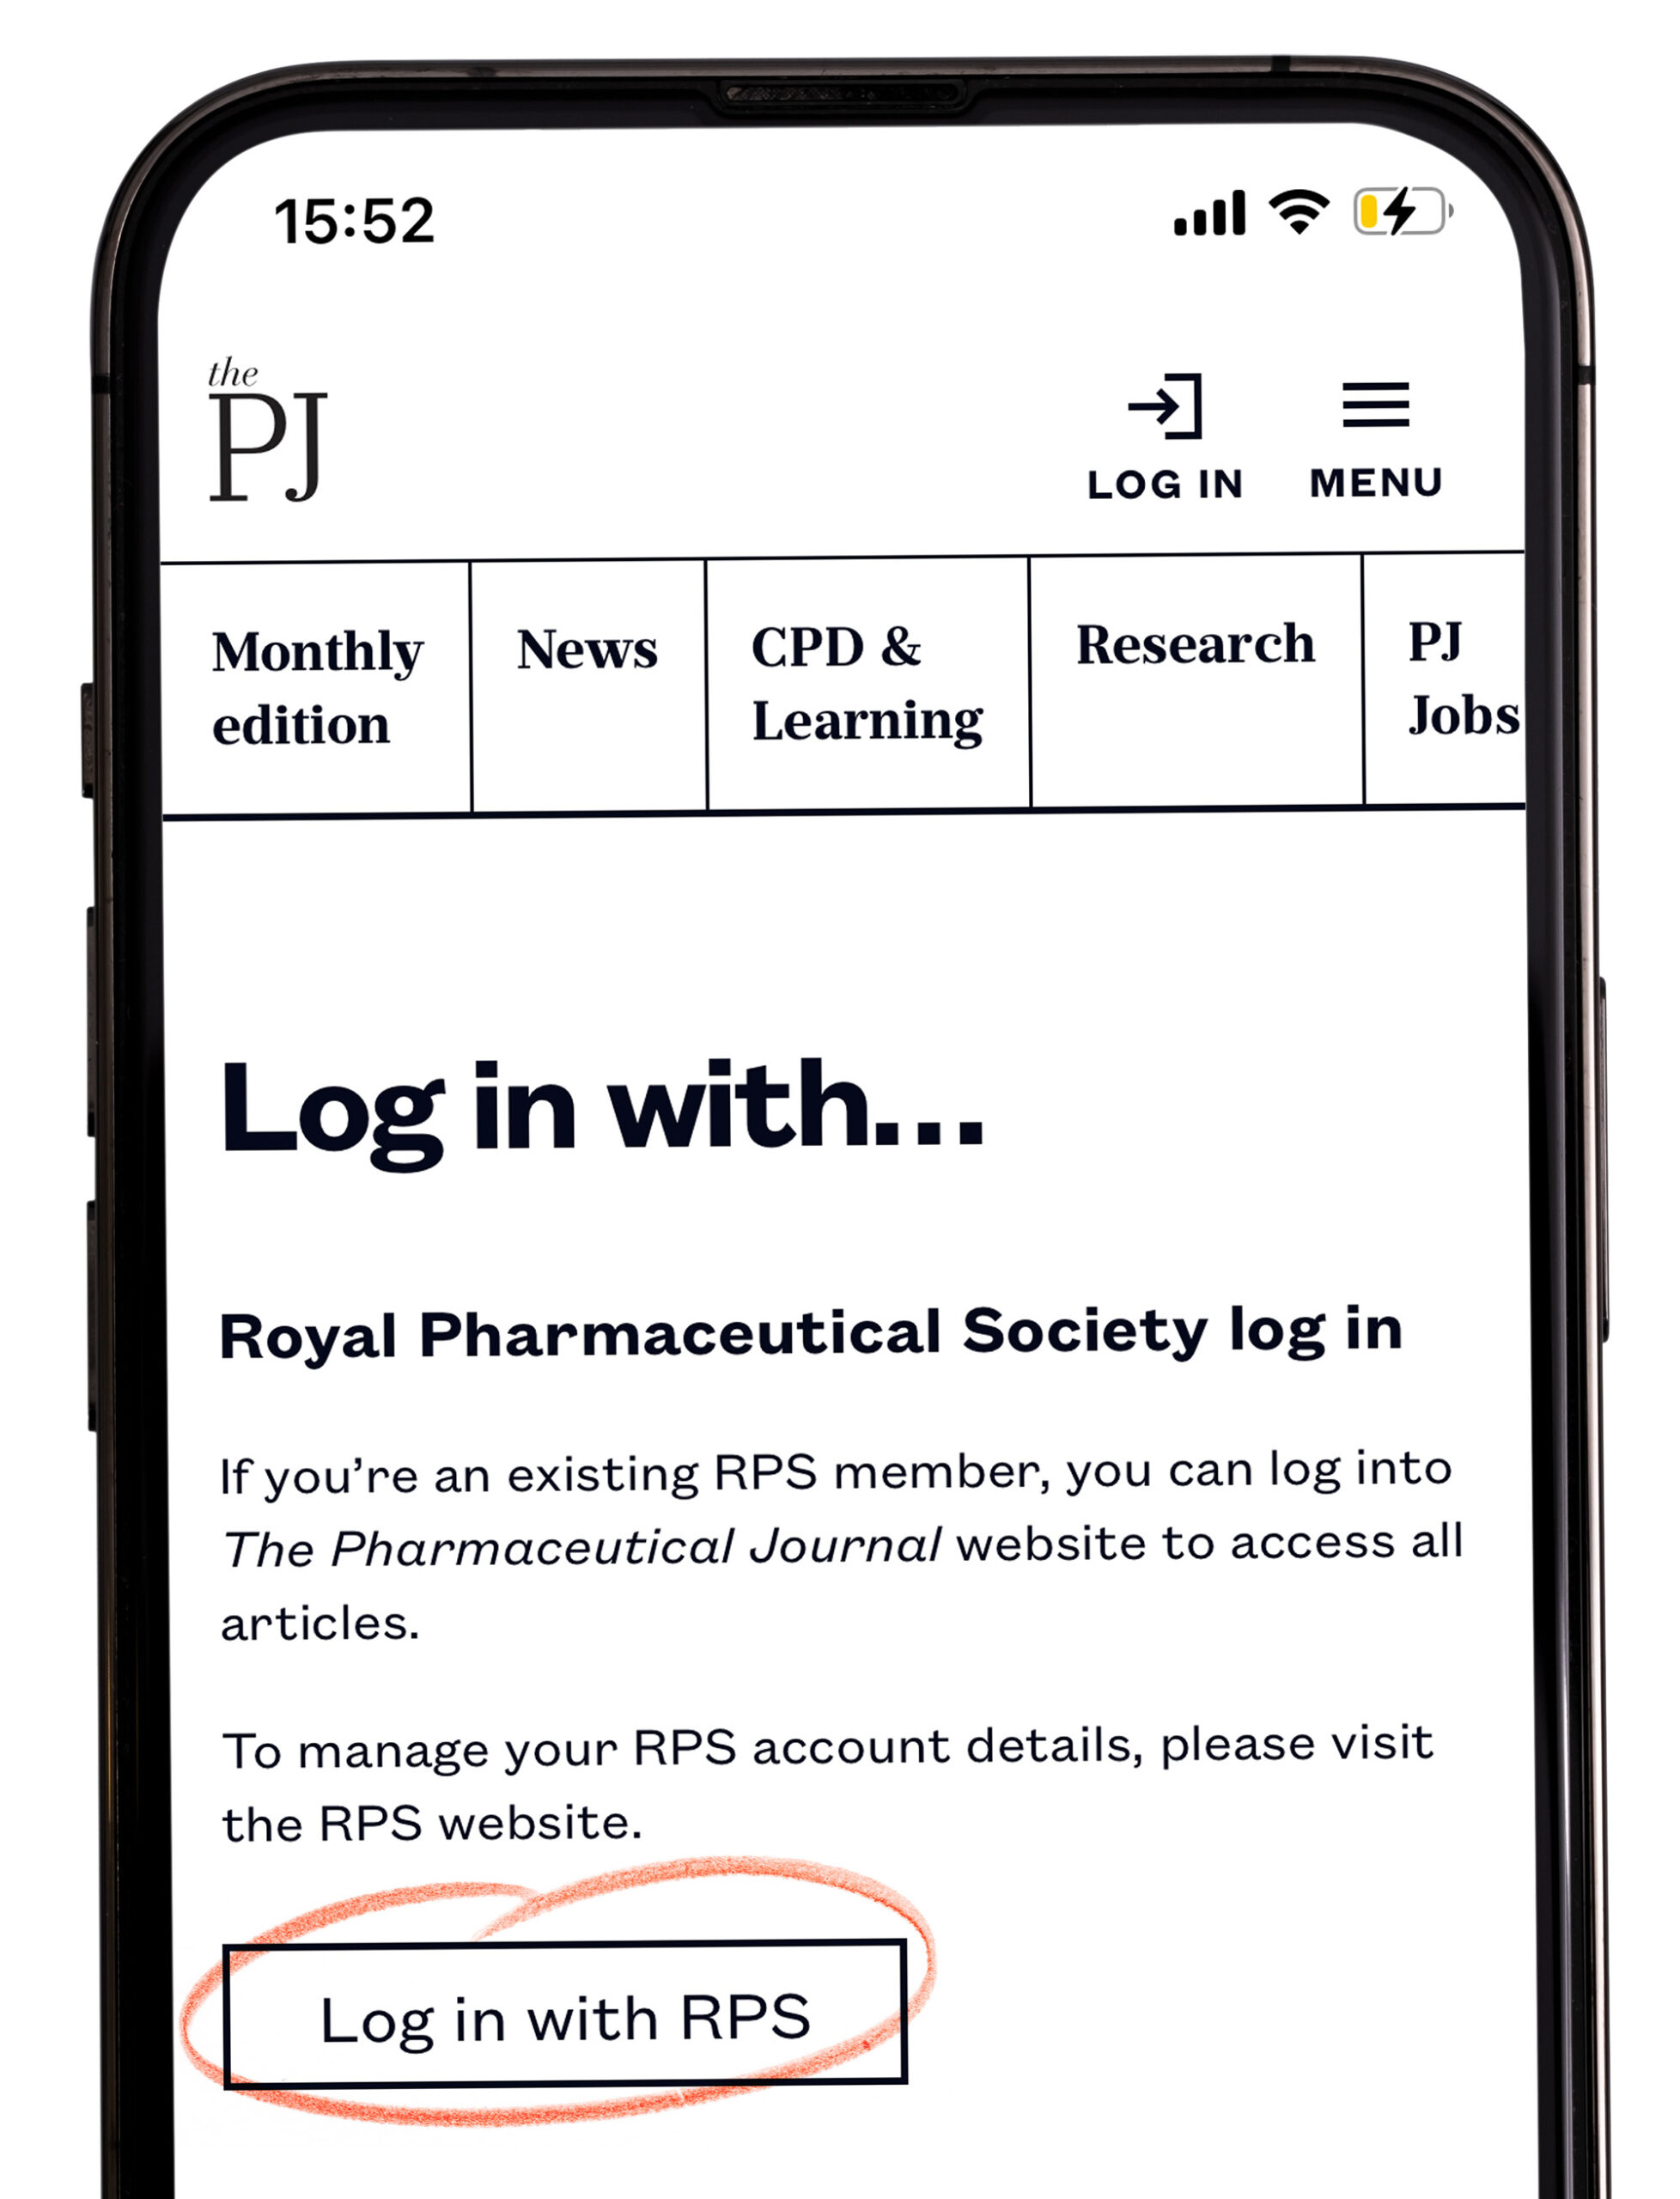 Image of an iphone showing the RPS login on the PJ website